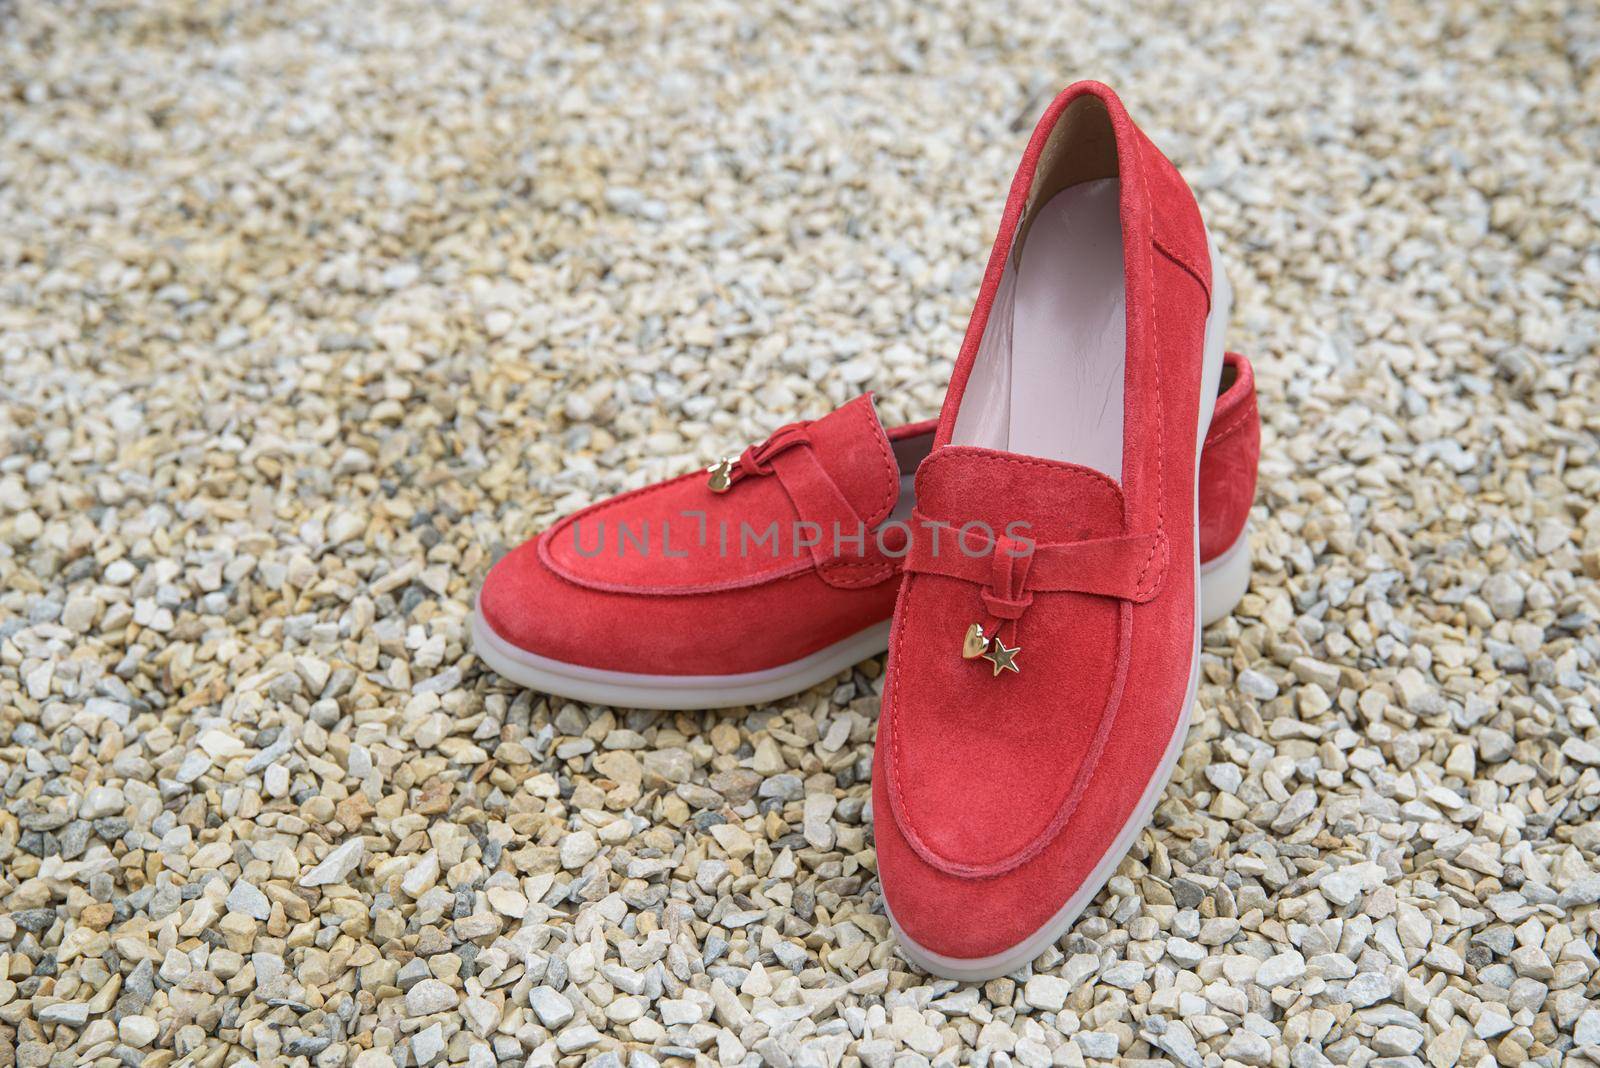 Woman's red stylish suede loafer shoes on the stone background. Pair of trendy female loafers shoes, outdoors.